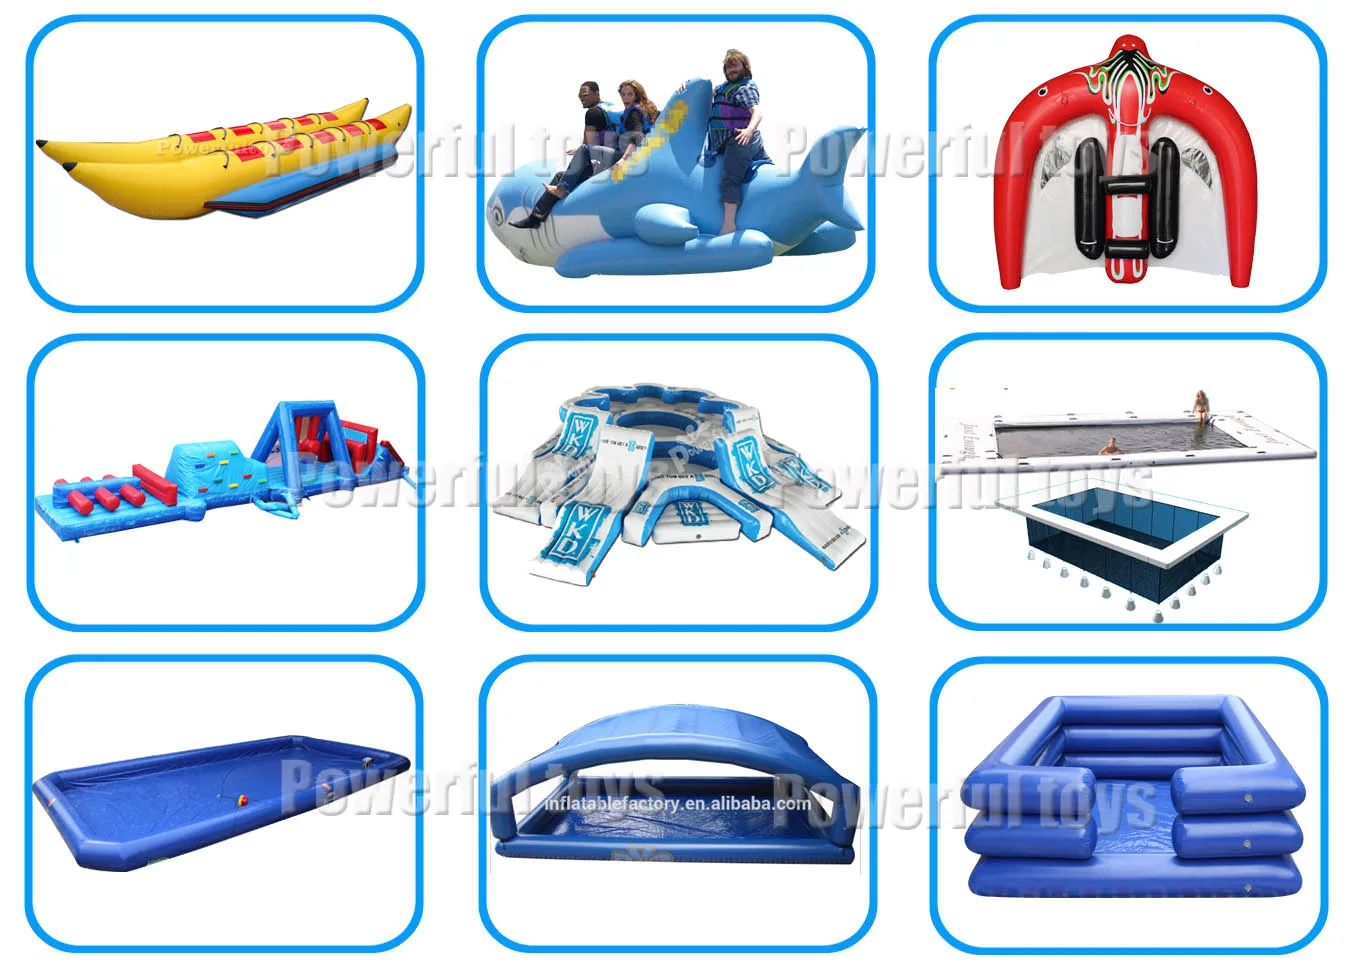 7x5m Inflatable Swimming Pool Inflatable Ocean Pool Water Game Fun Entertainment Floating Pool